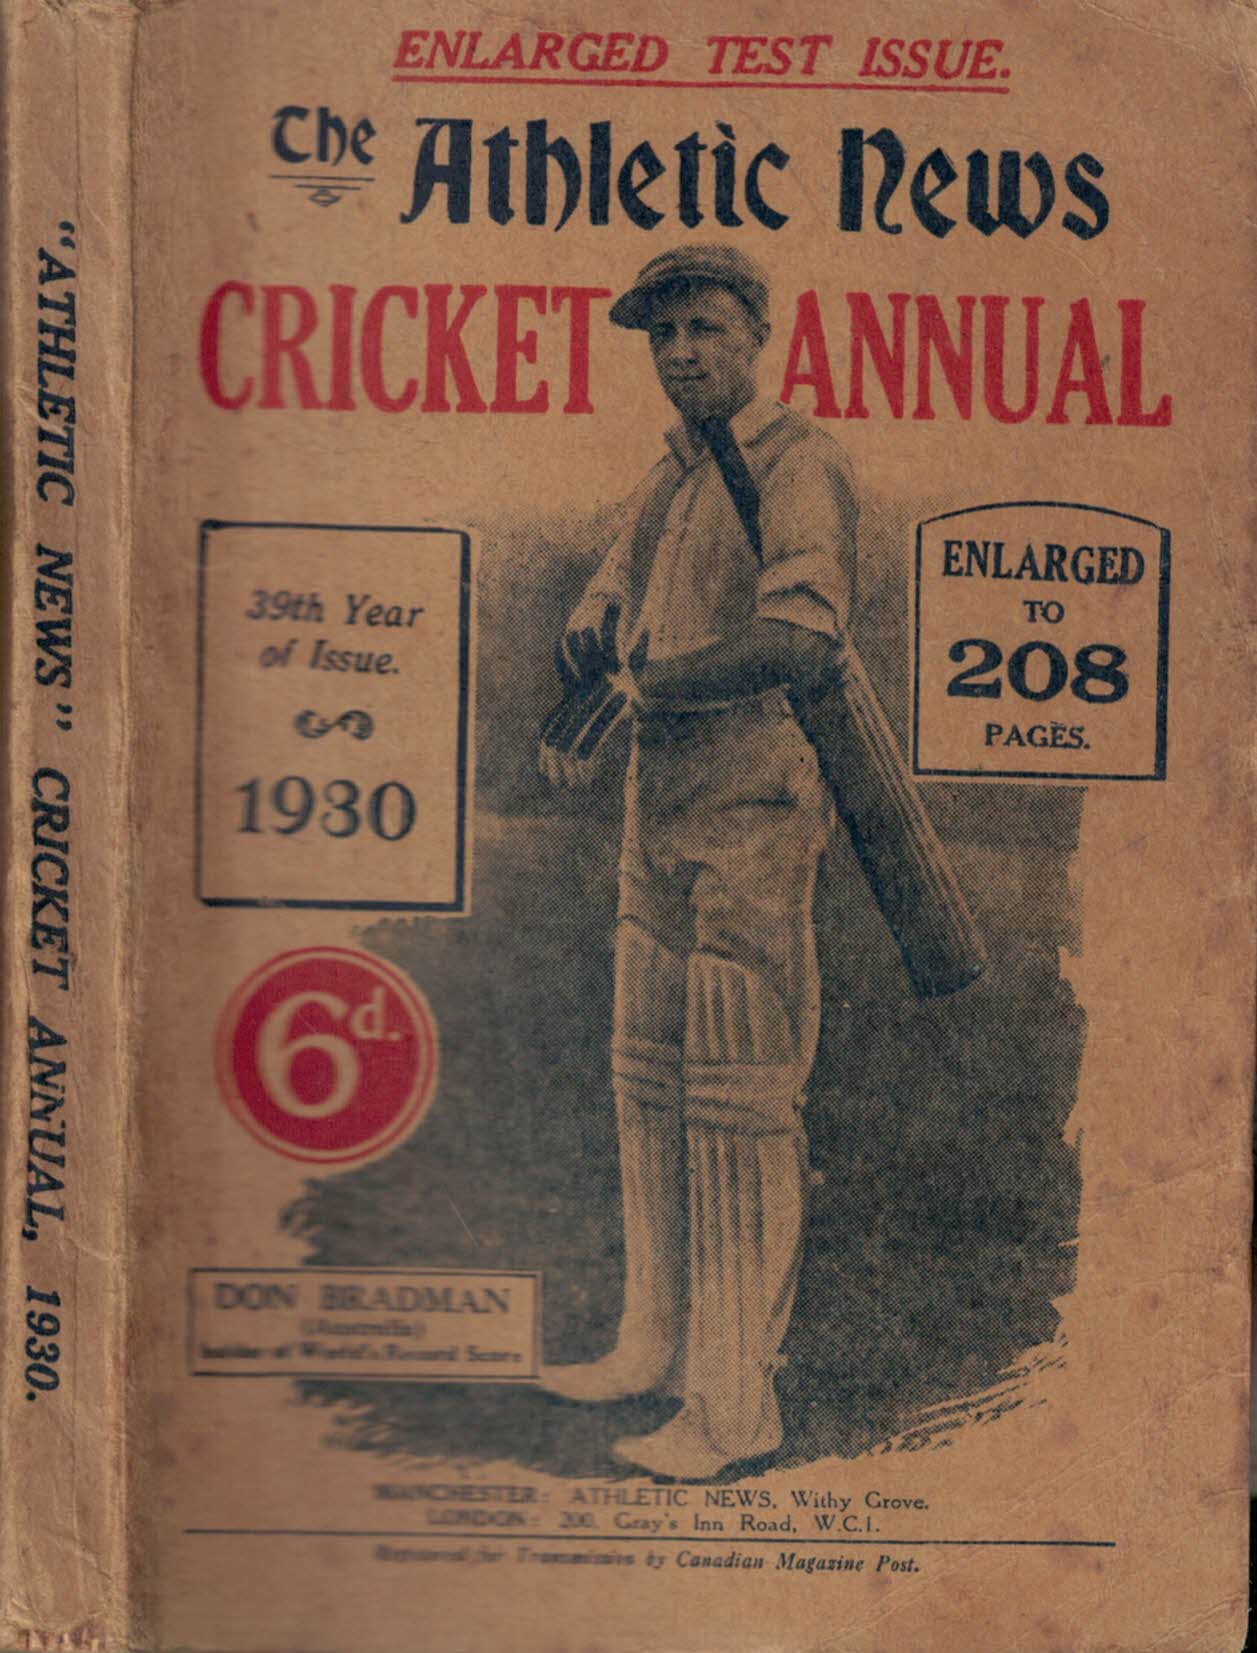 The Athletic News Cricket Annual. 1930.